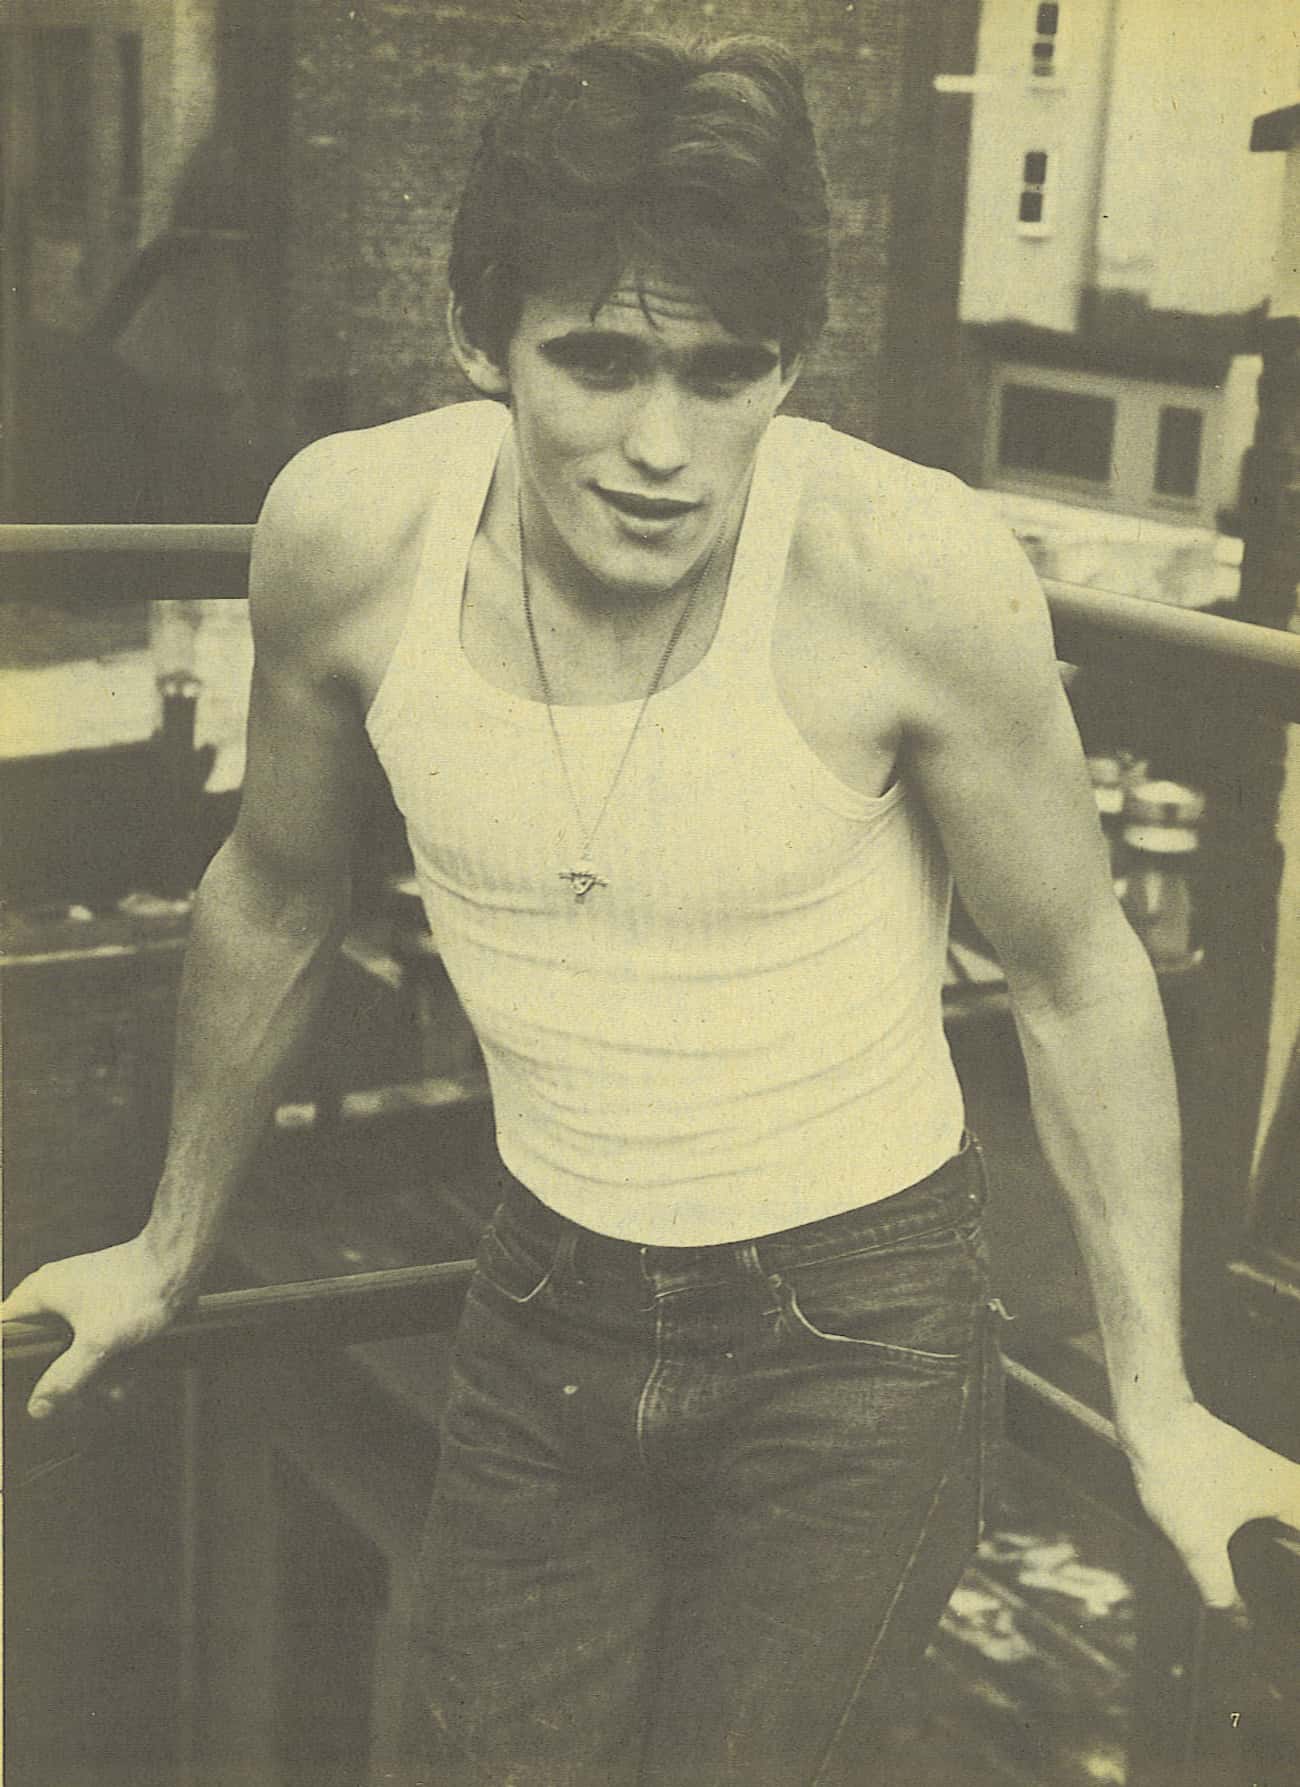 Young Matt Dillon in White Wifebeater and Dark Jeans